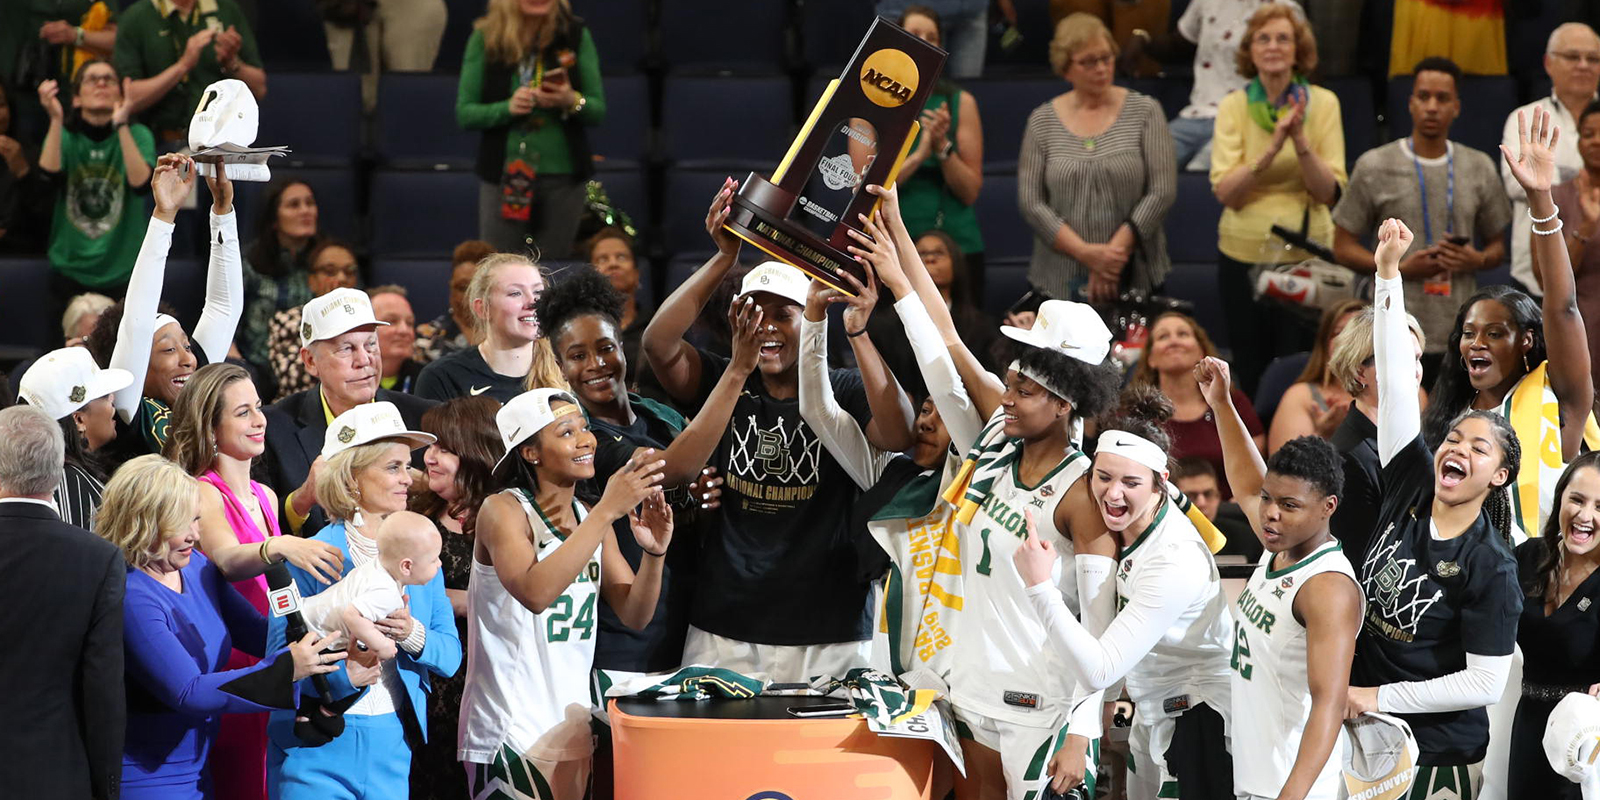 Kalani Brown lifts the national championship trophy as the Lady Bears celebrate on stage